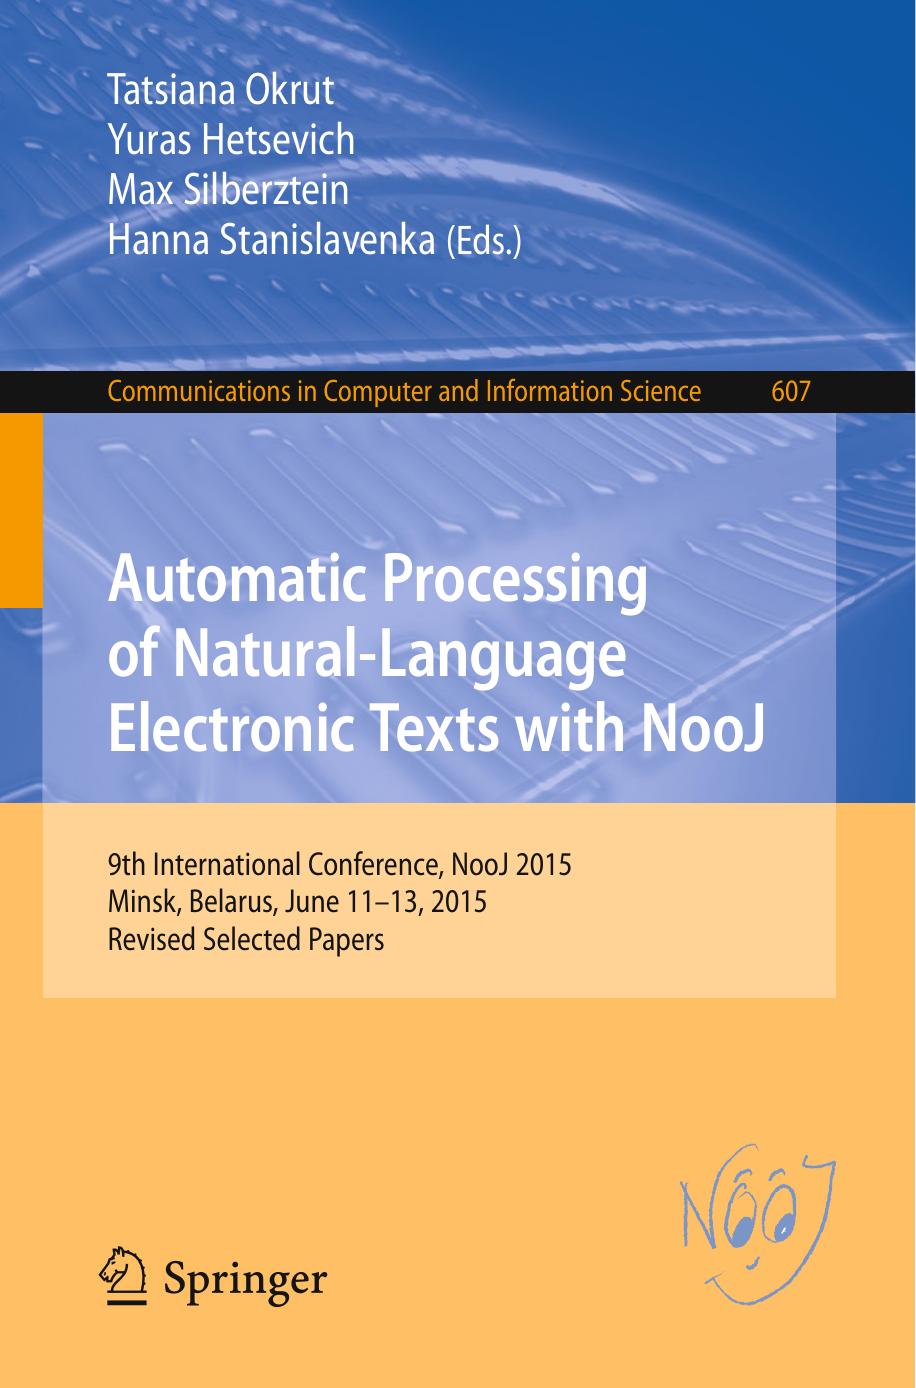 Automatic Processing of Natural-Language Electronic Texts with NooJ: 9th International Conference, NooJ 2015, Minsk, Belarus, June 11-13, 2015, Revised Selected Papers